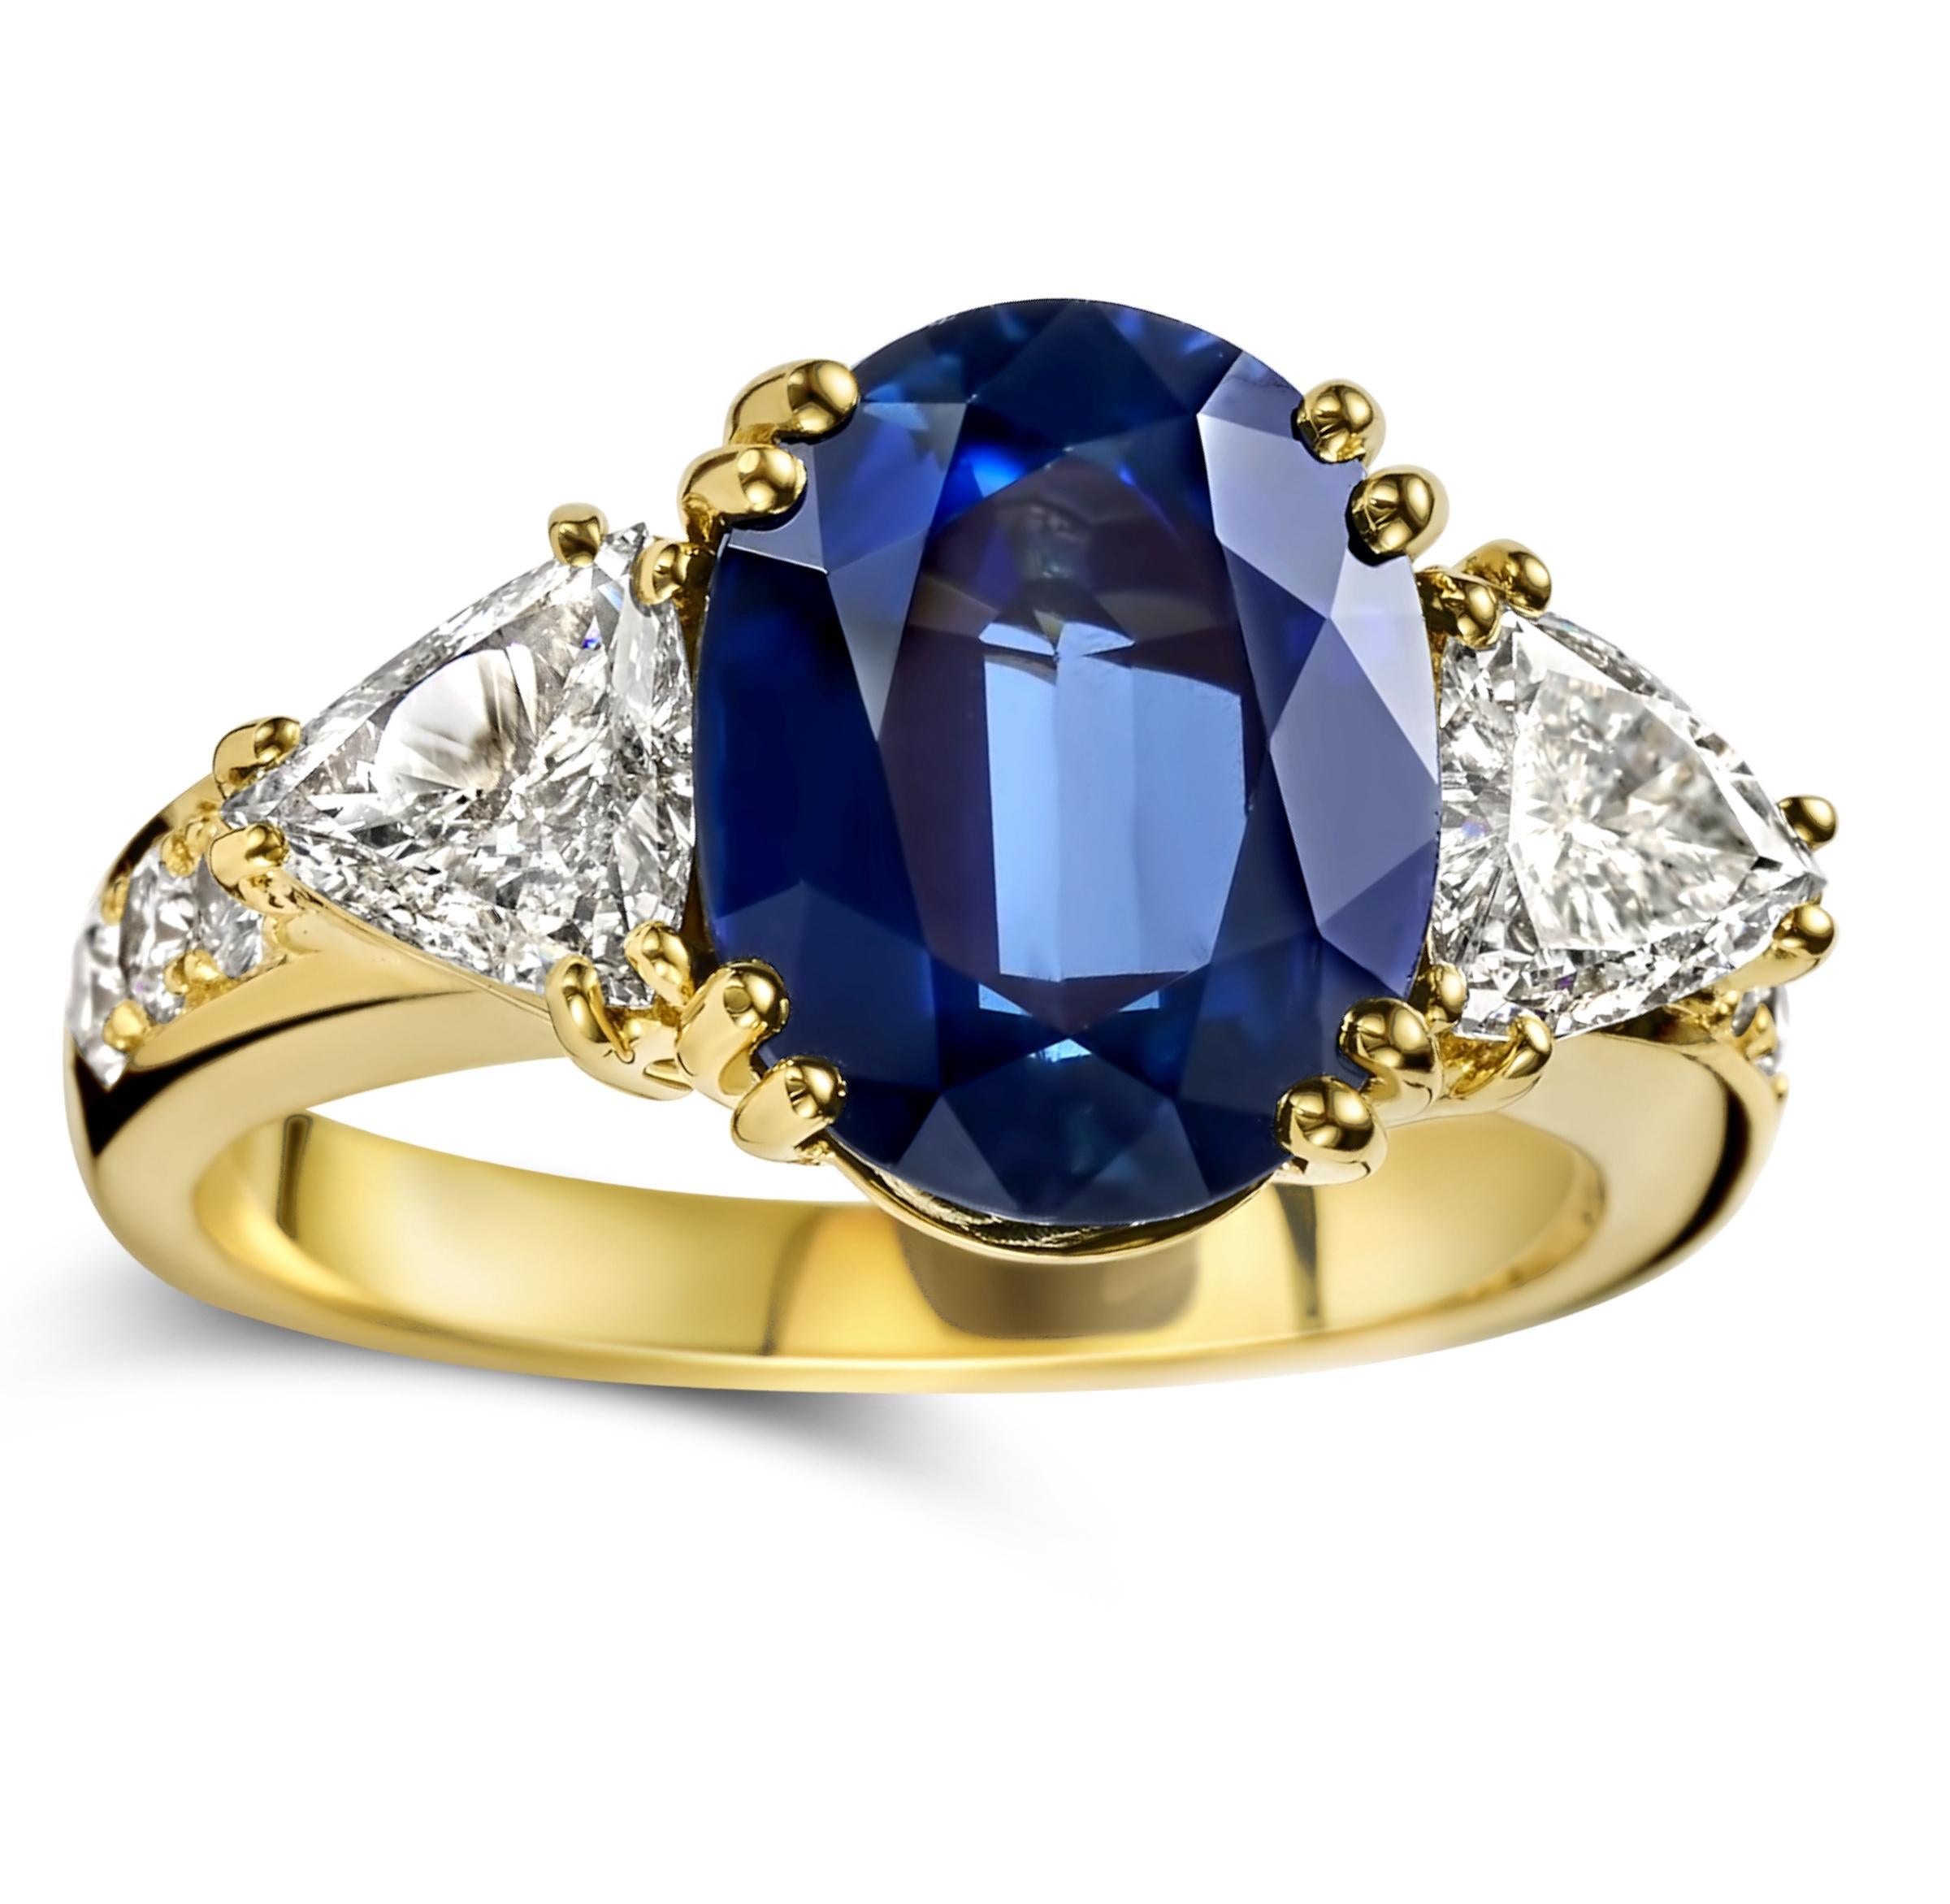 18kt Yellow Gold Ring with Beautiful 6.68ct Sapphire & 1.07ct Triangle Diamonds For Sale 1